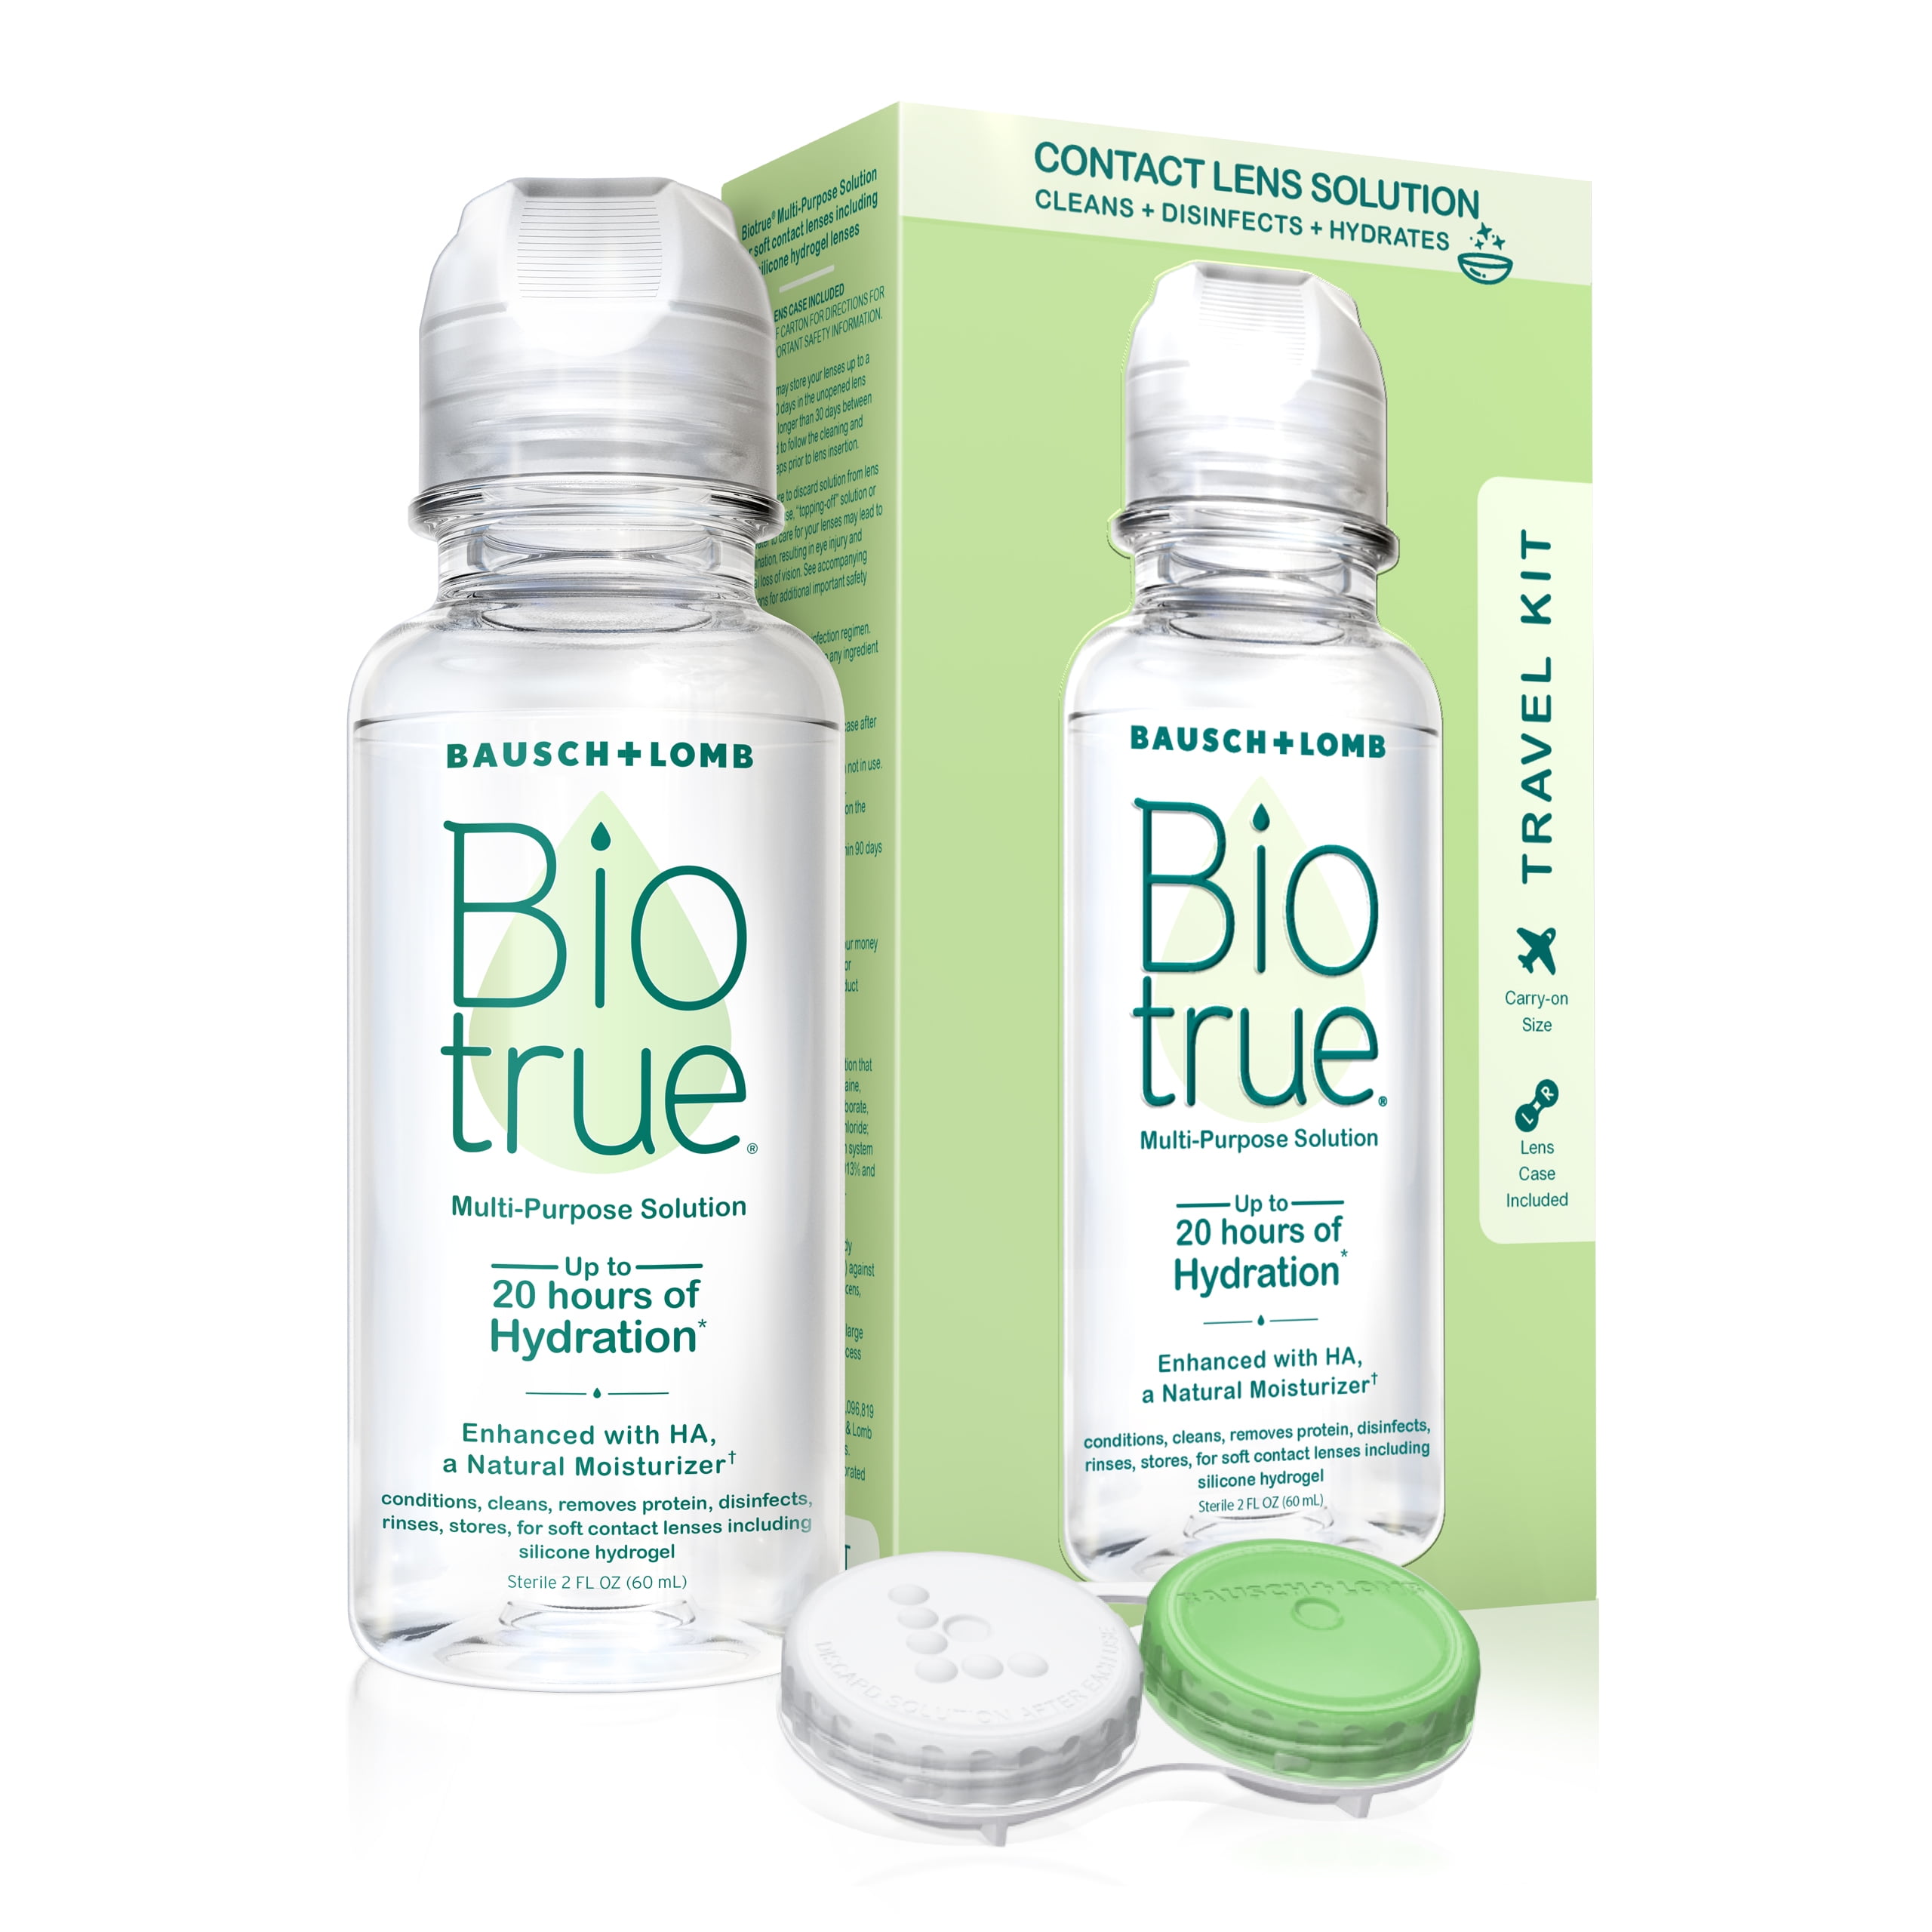 buy-biotrue-multi-purpose-contact-lens-solution-from-bausch-lomb-2